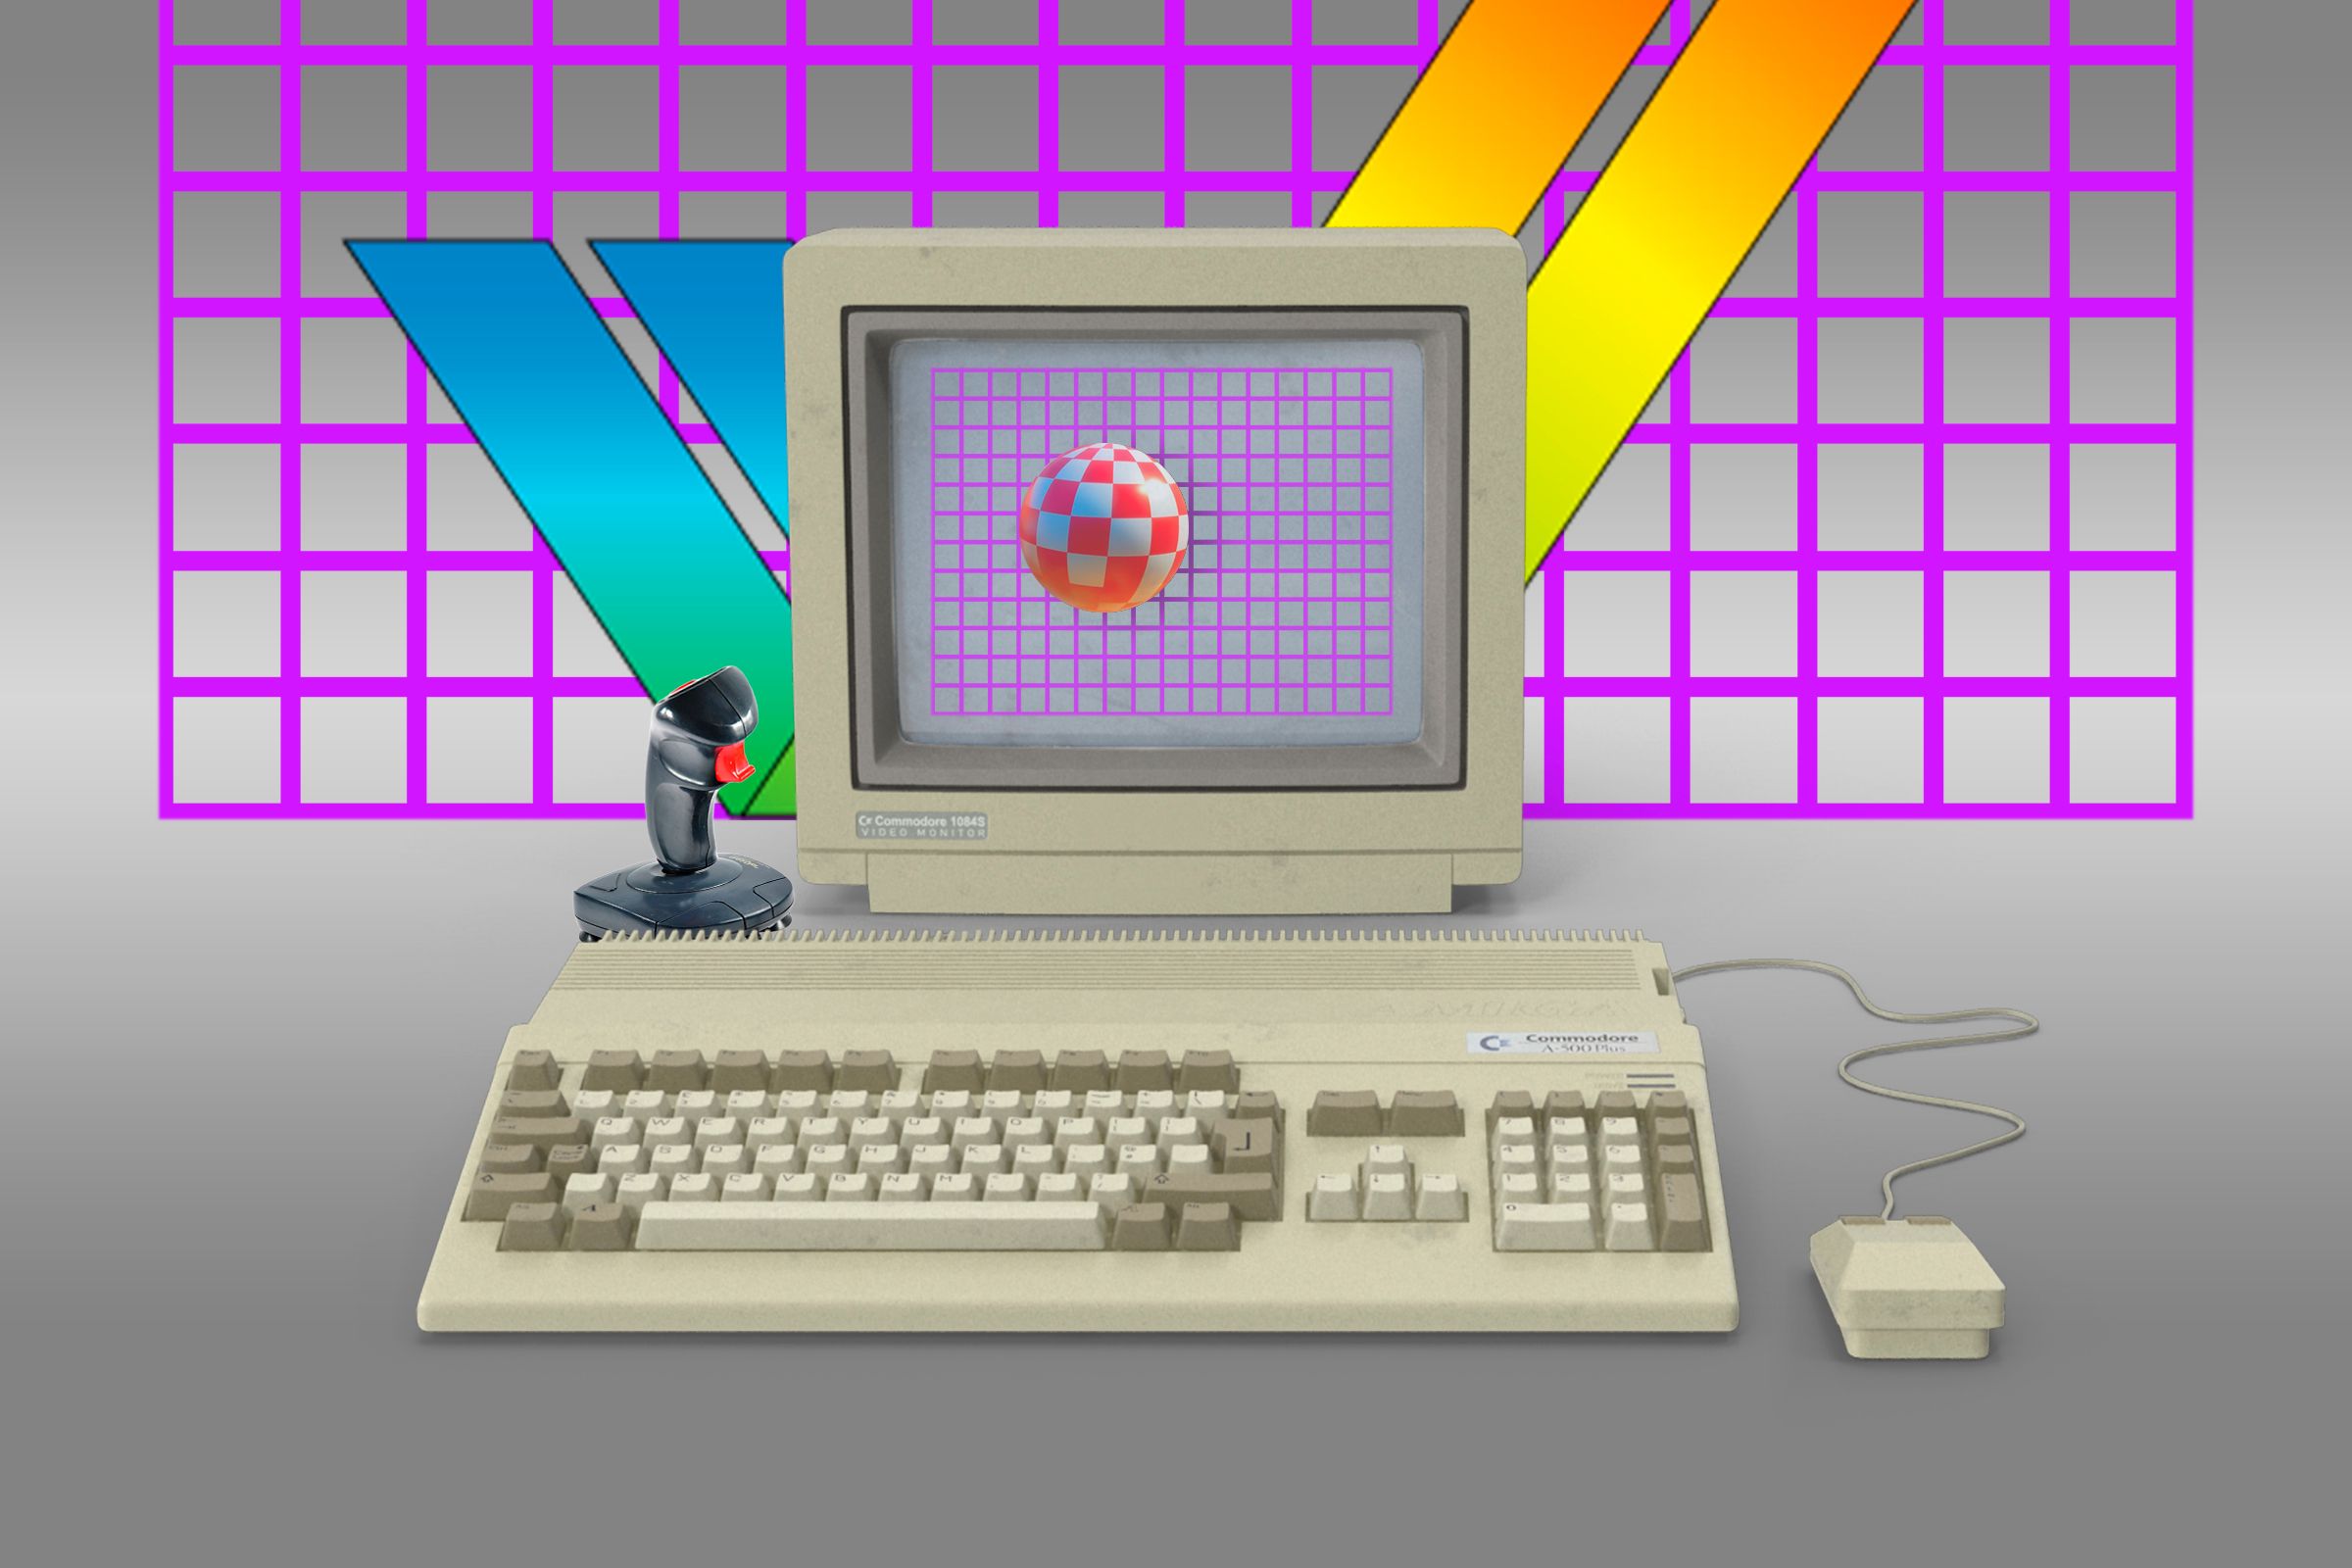 A Commodore Amiga 500 home computer with a mouse and joystick, plugged into a monitor displaying the famous 1984 Boing Ball demo.